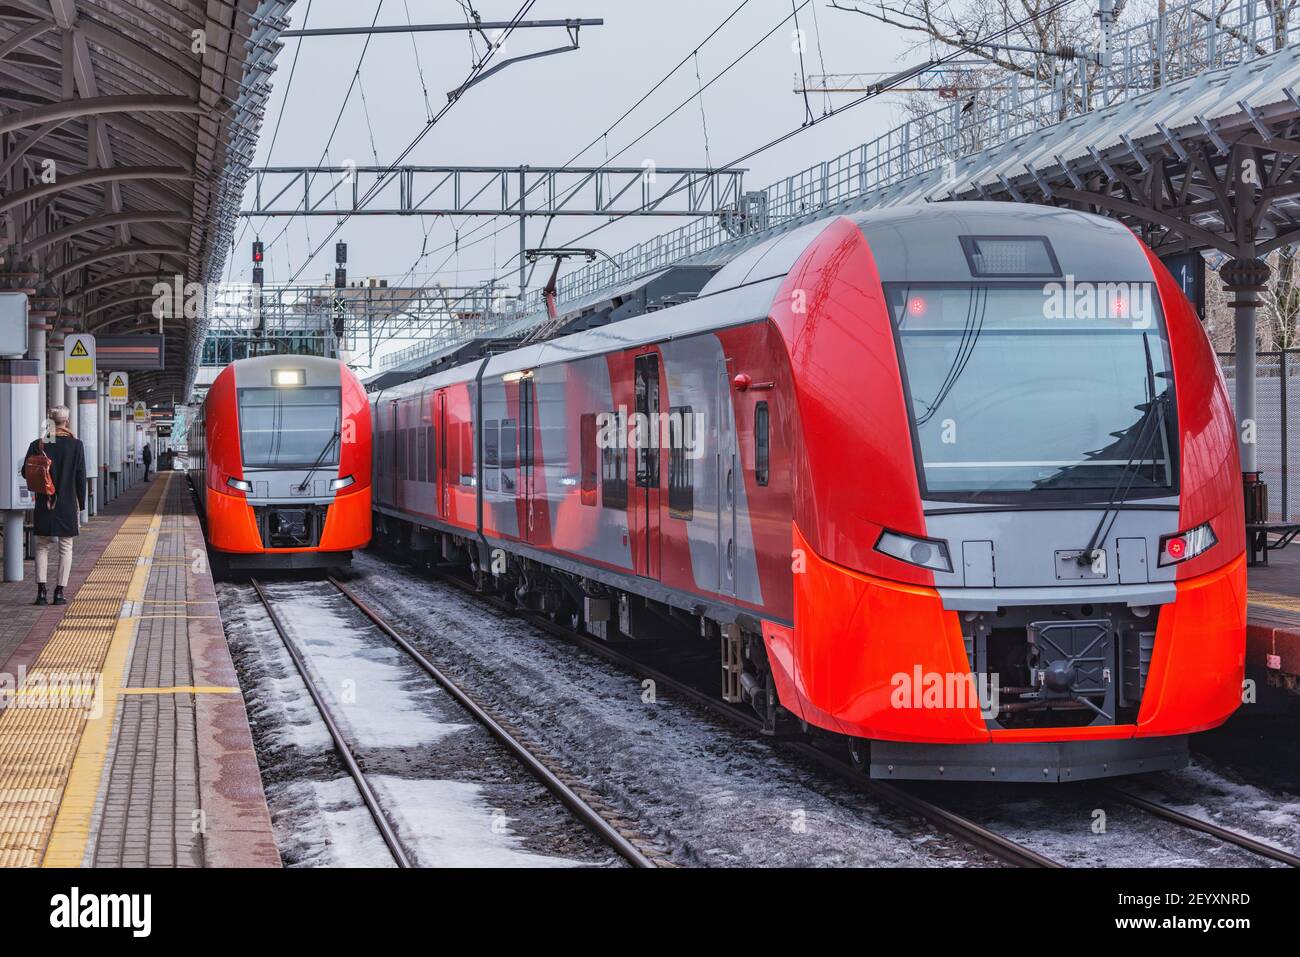 Highspeed trains stand by the station platform at winter day. Stock Photo